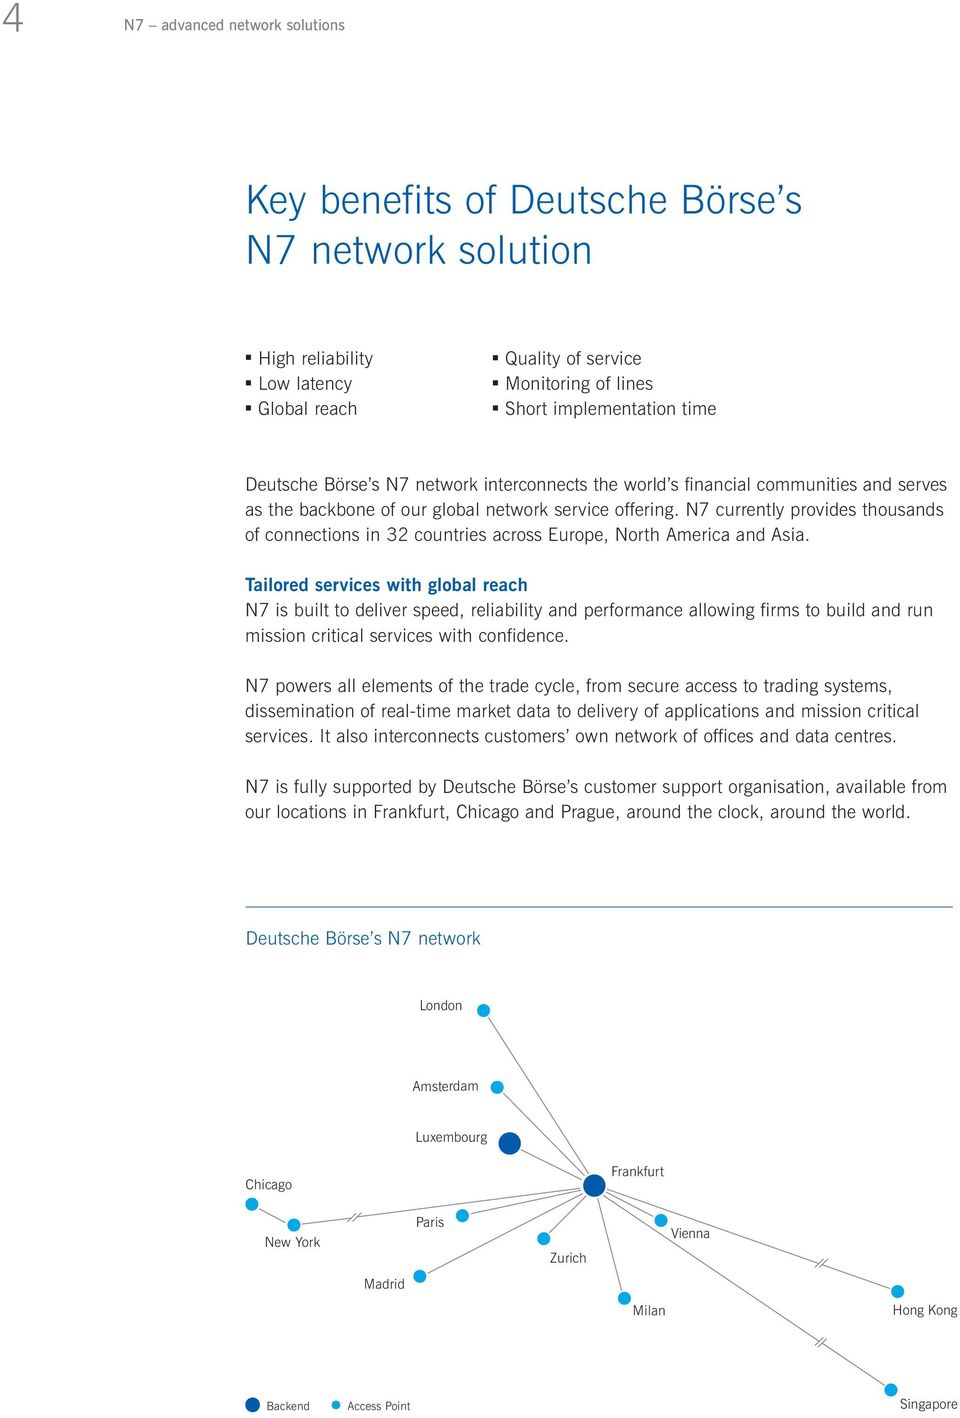 N7 currently provides thousands of connections in 32 countries across Europe, North America and Asia.